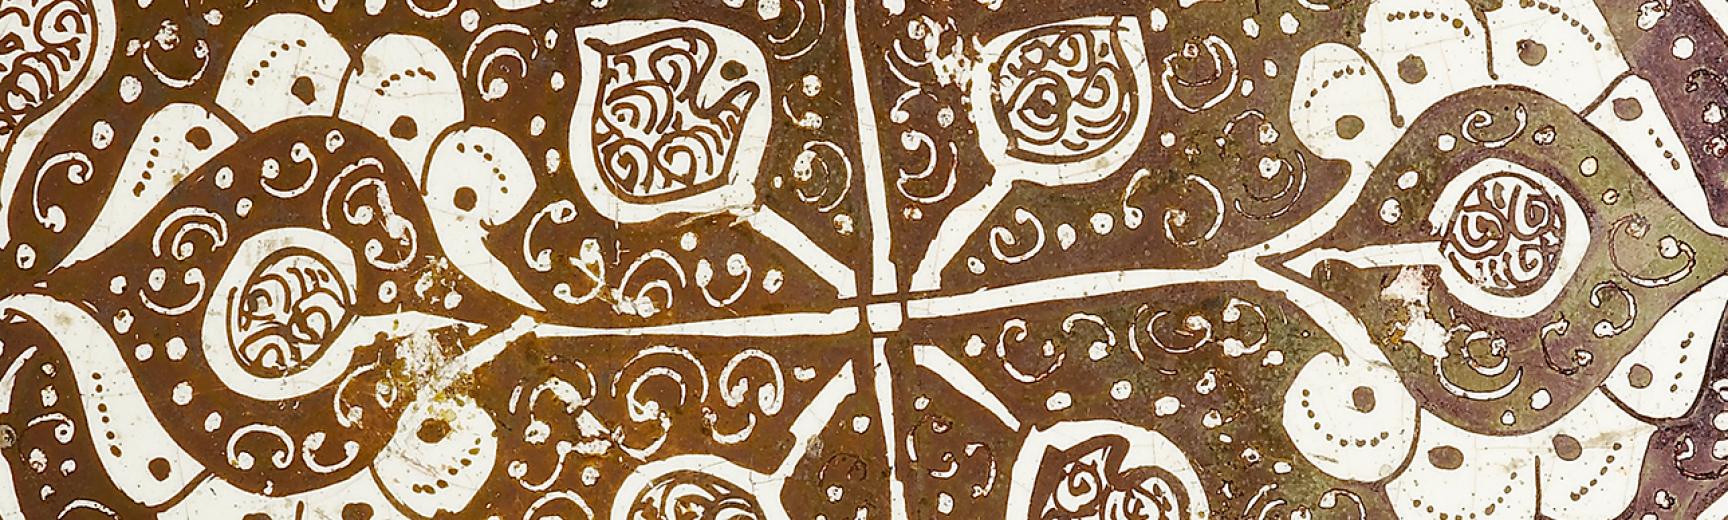 EAX.289 Star tile with vegetal and calligraphic decoration